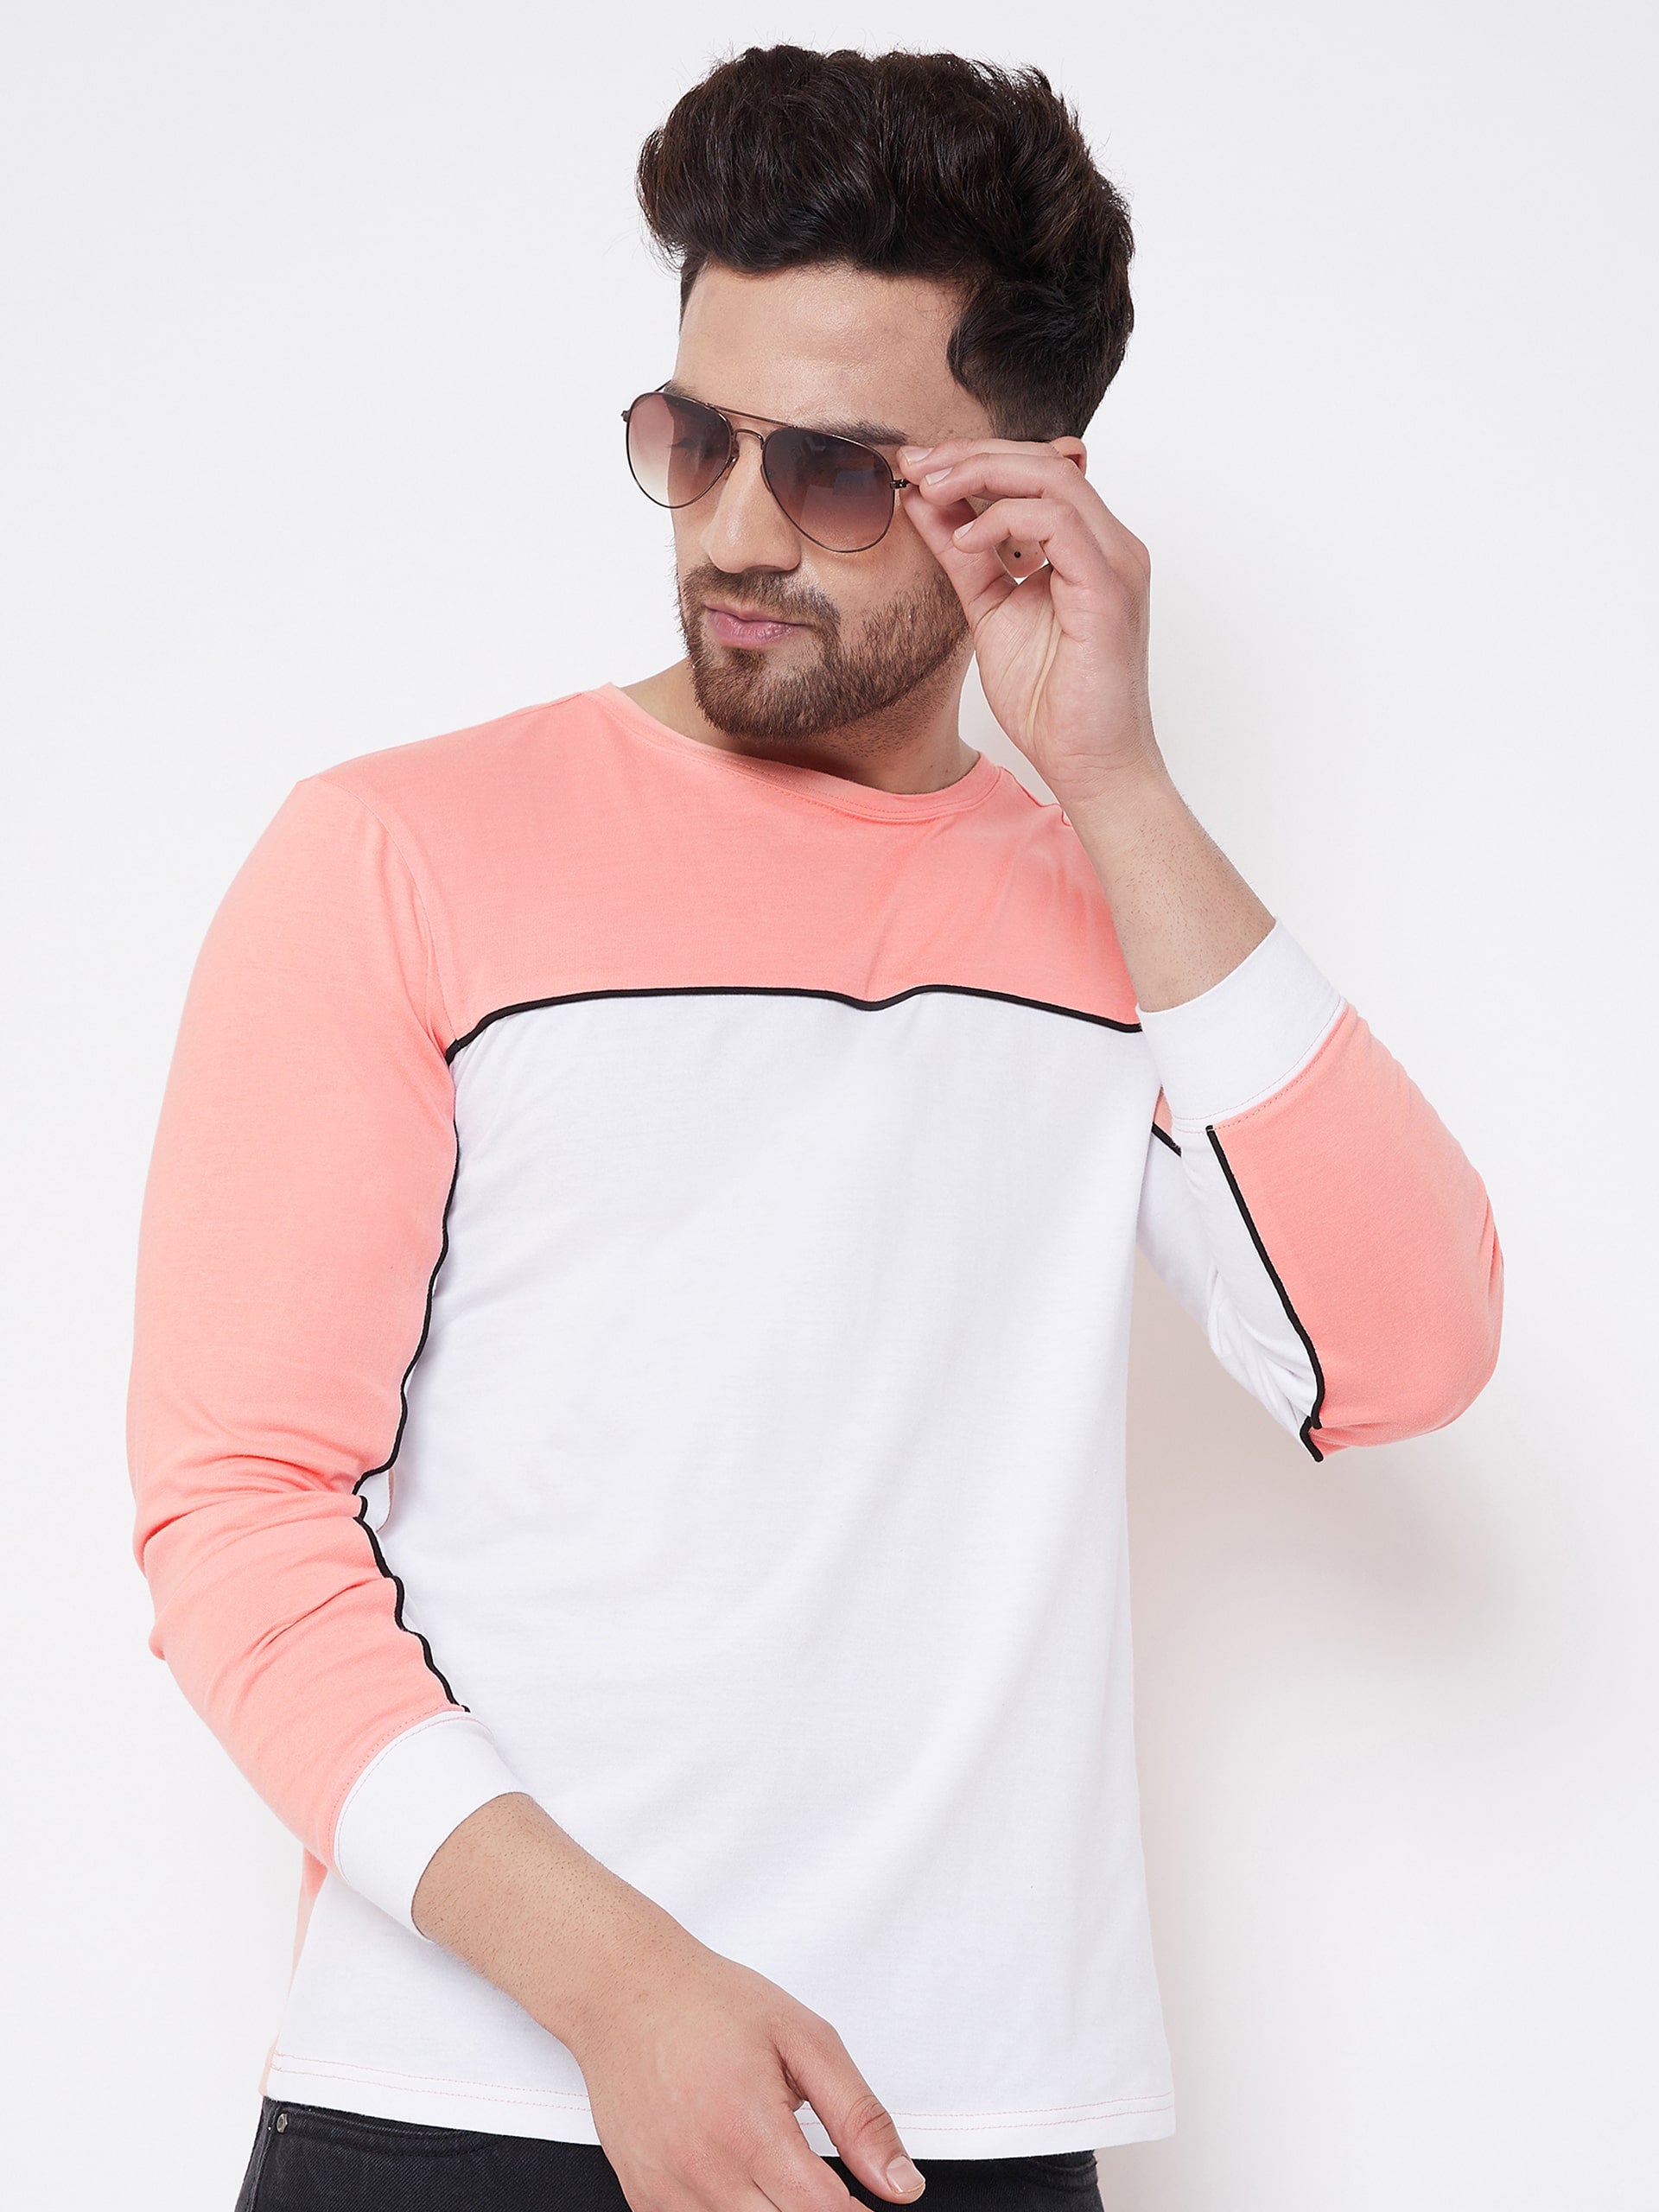 Coral/Black/White Color Block Men's Full Sleeves Round Neck T-Shirt